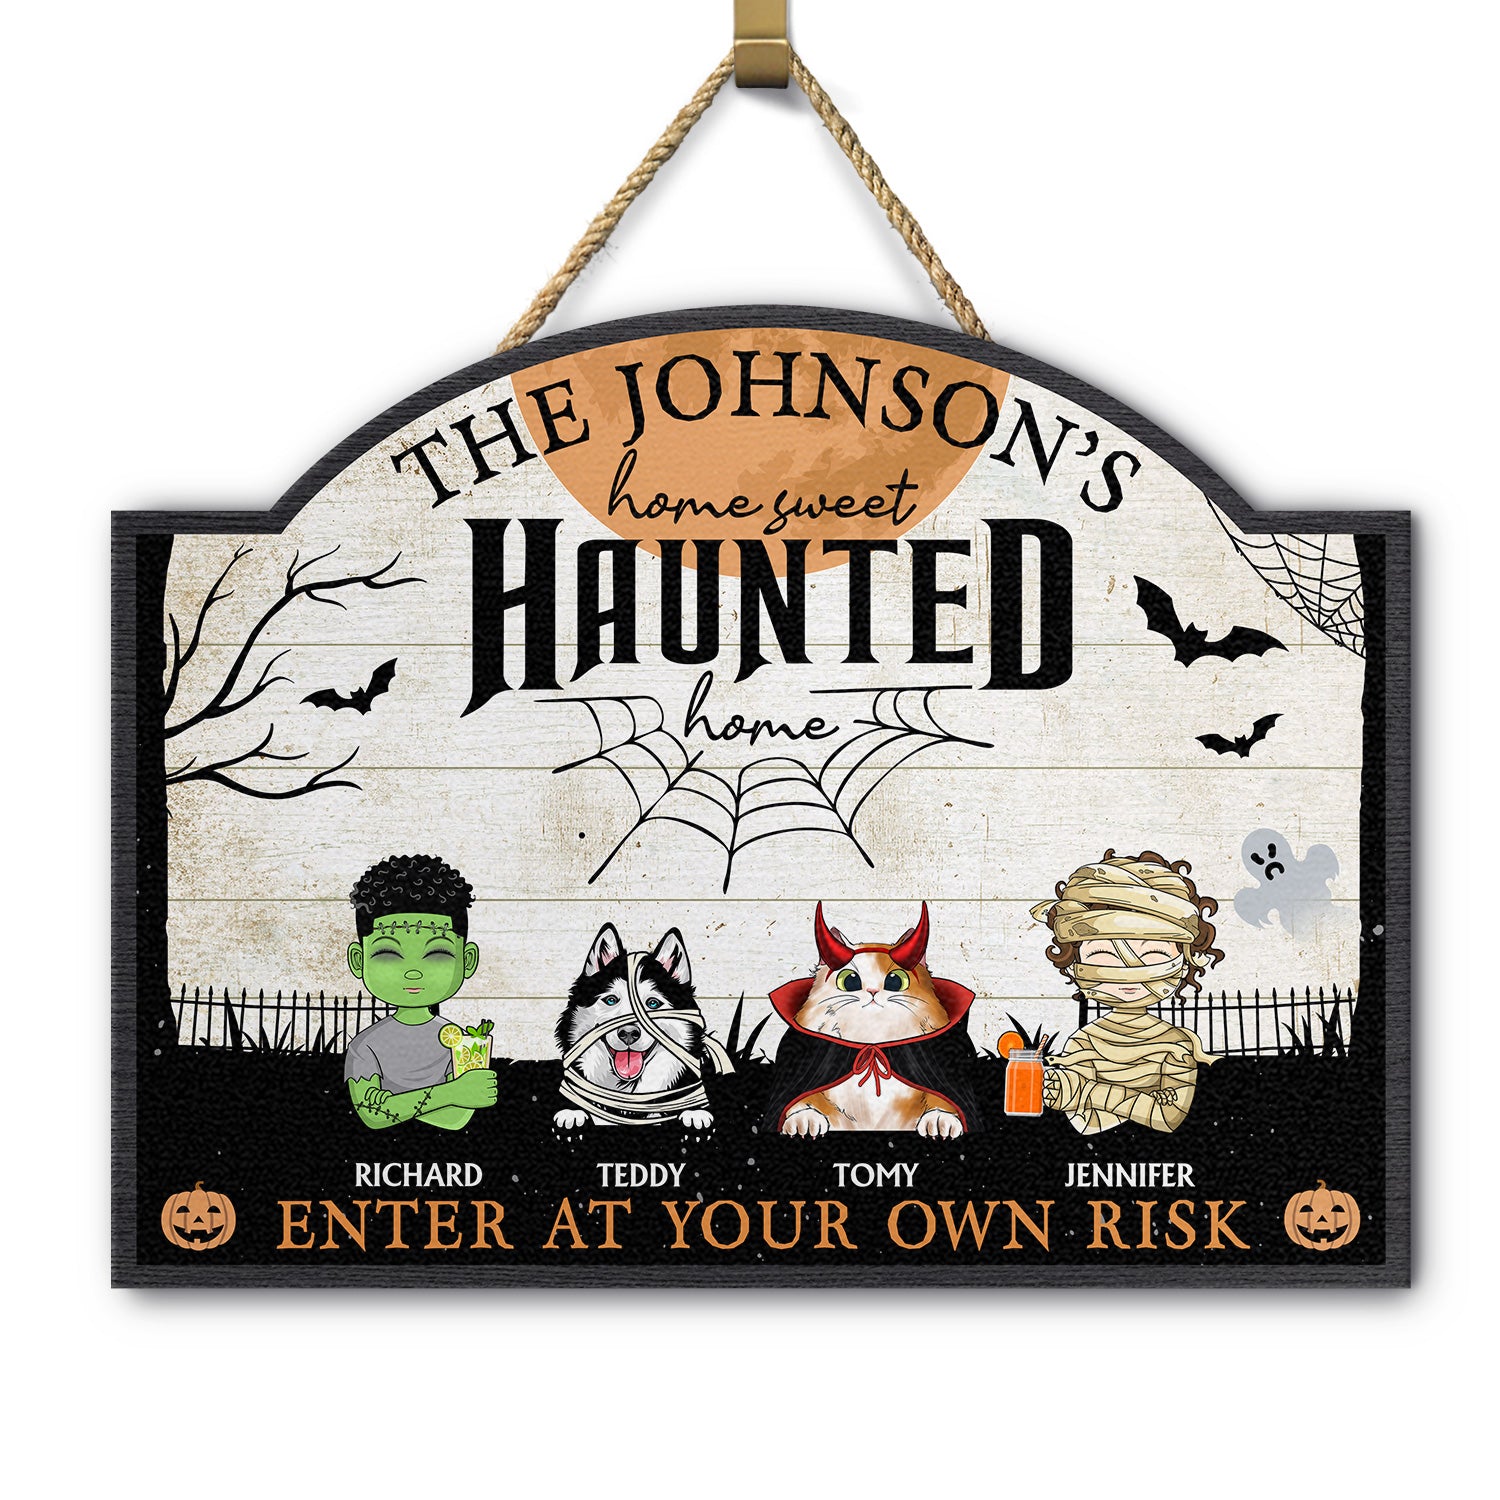 Home Haunted Home Enter At Your Own Risk Kid & Pet - Halloween, Birthday, Home Warming, Funny Gift For Family With Dog, Cat - Personalized Custom Shaped Wood Sign